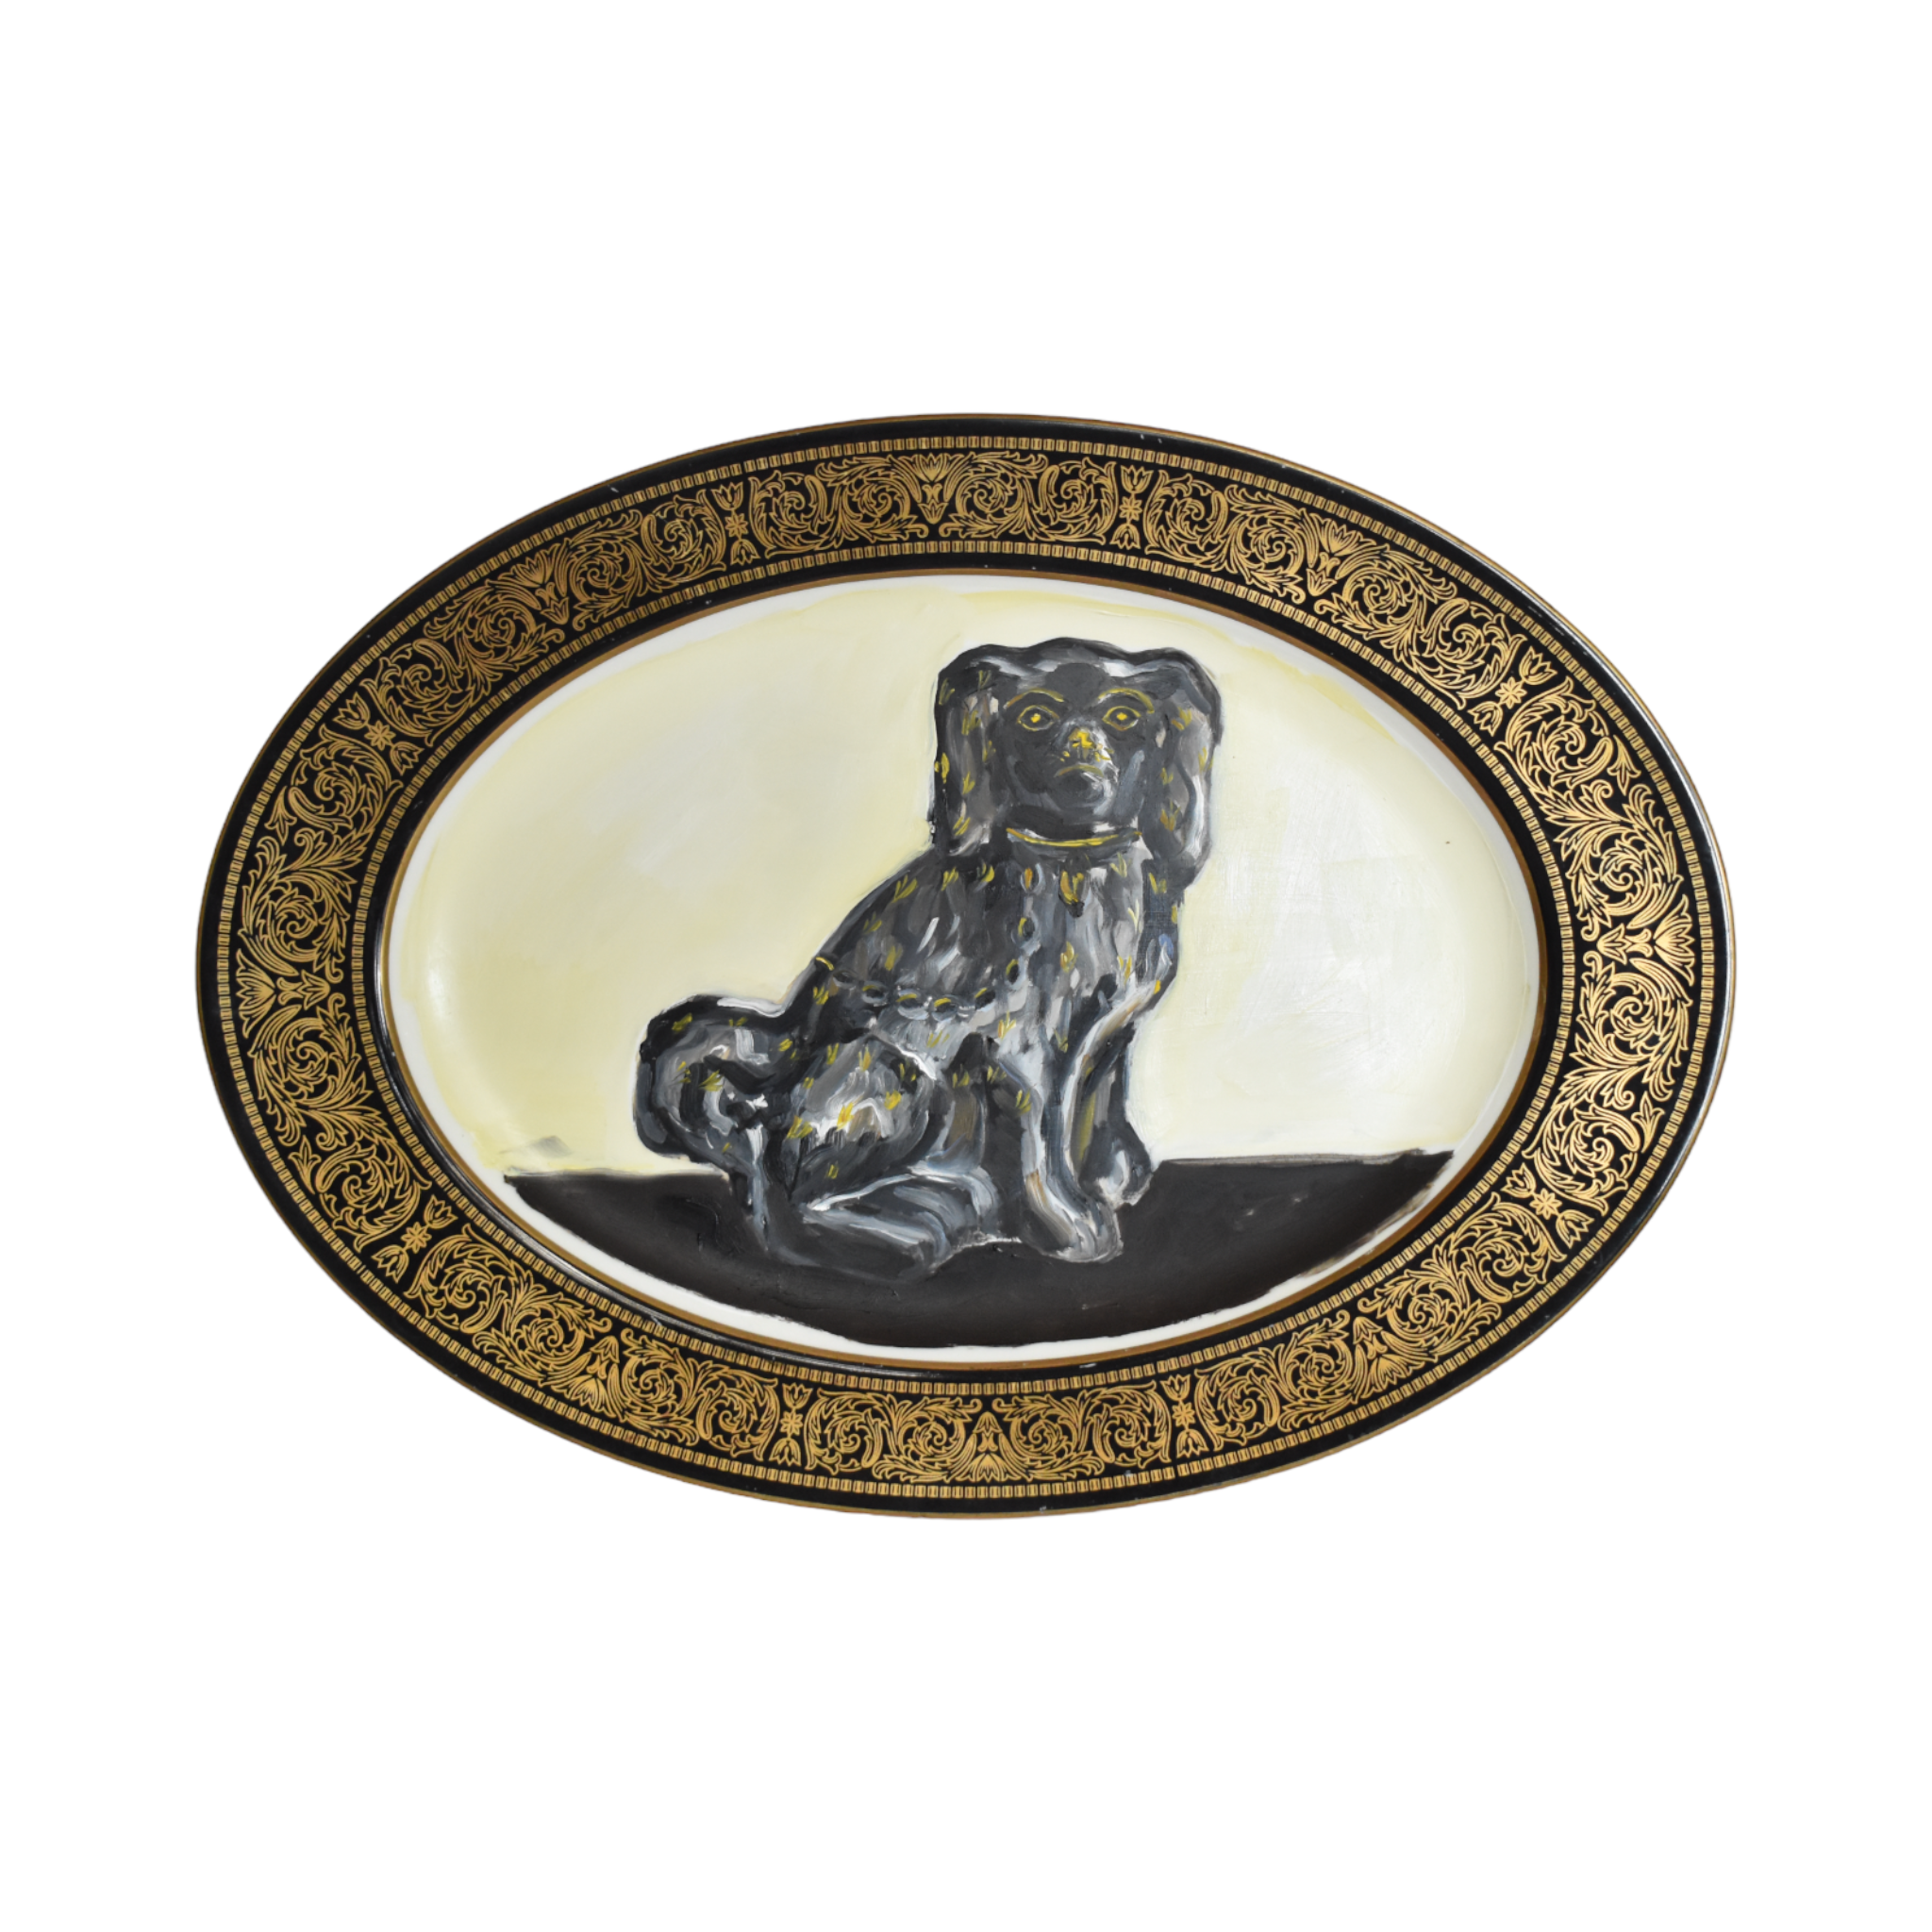 No. 1014 Othello the Jackfield Staffordshire Spaniel and His Portrait